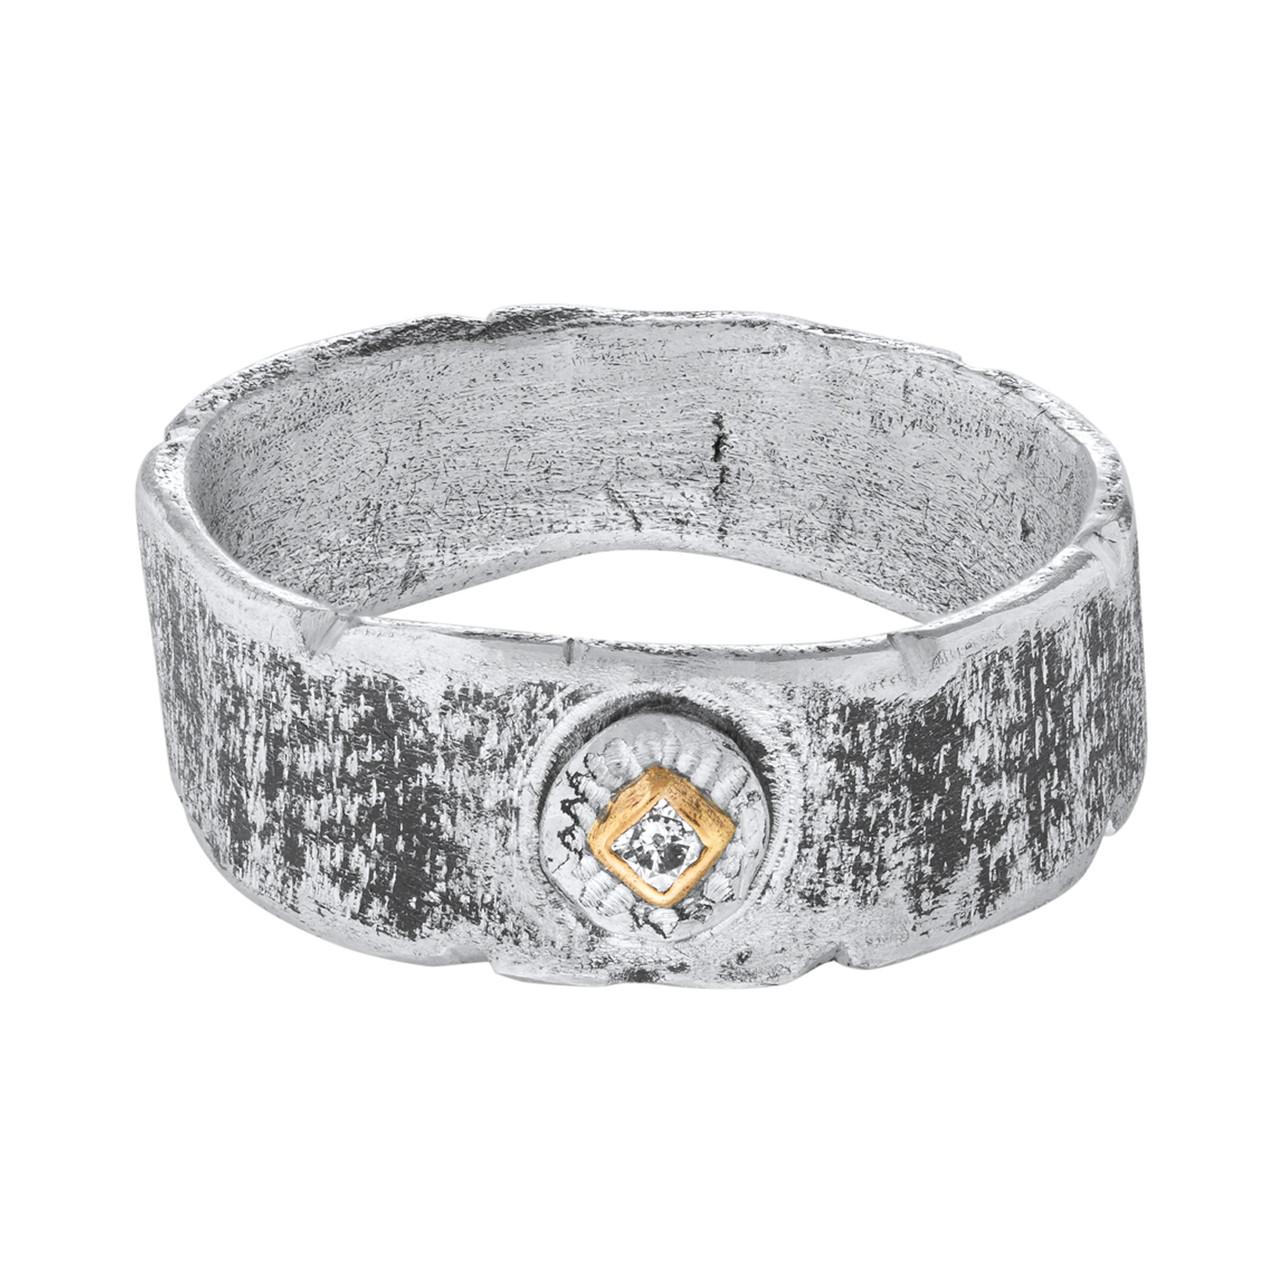 Signature Wedding Band in Silver & 14ct Yellow Gold, Franny E, tomfoolery